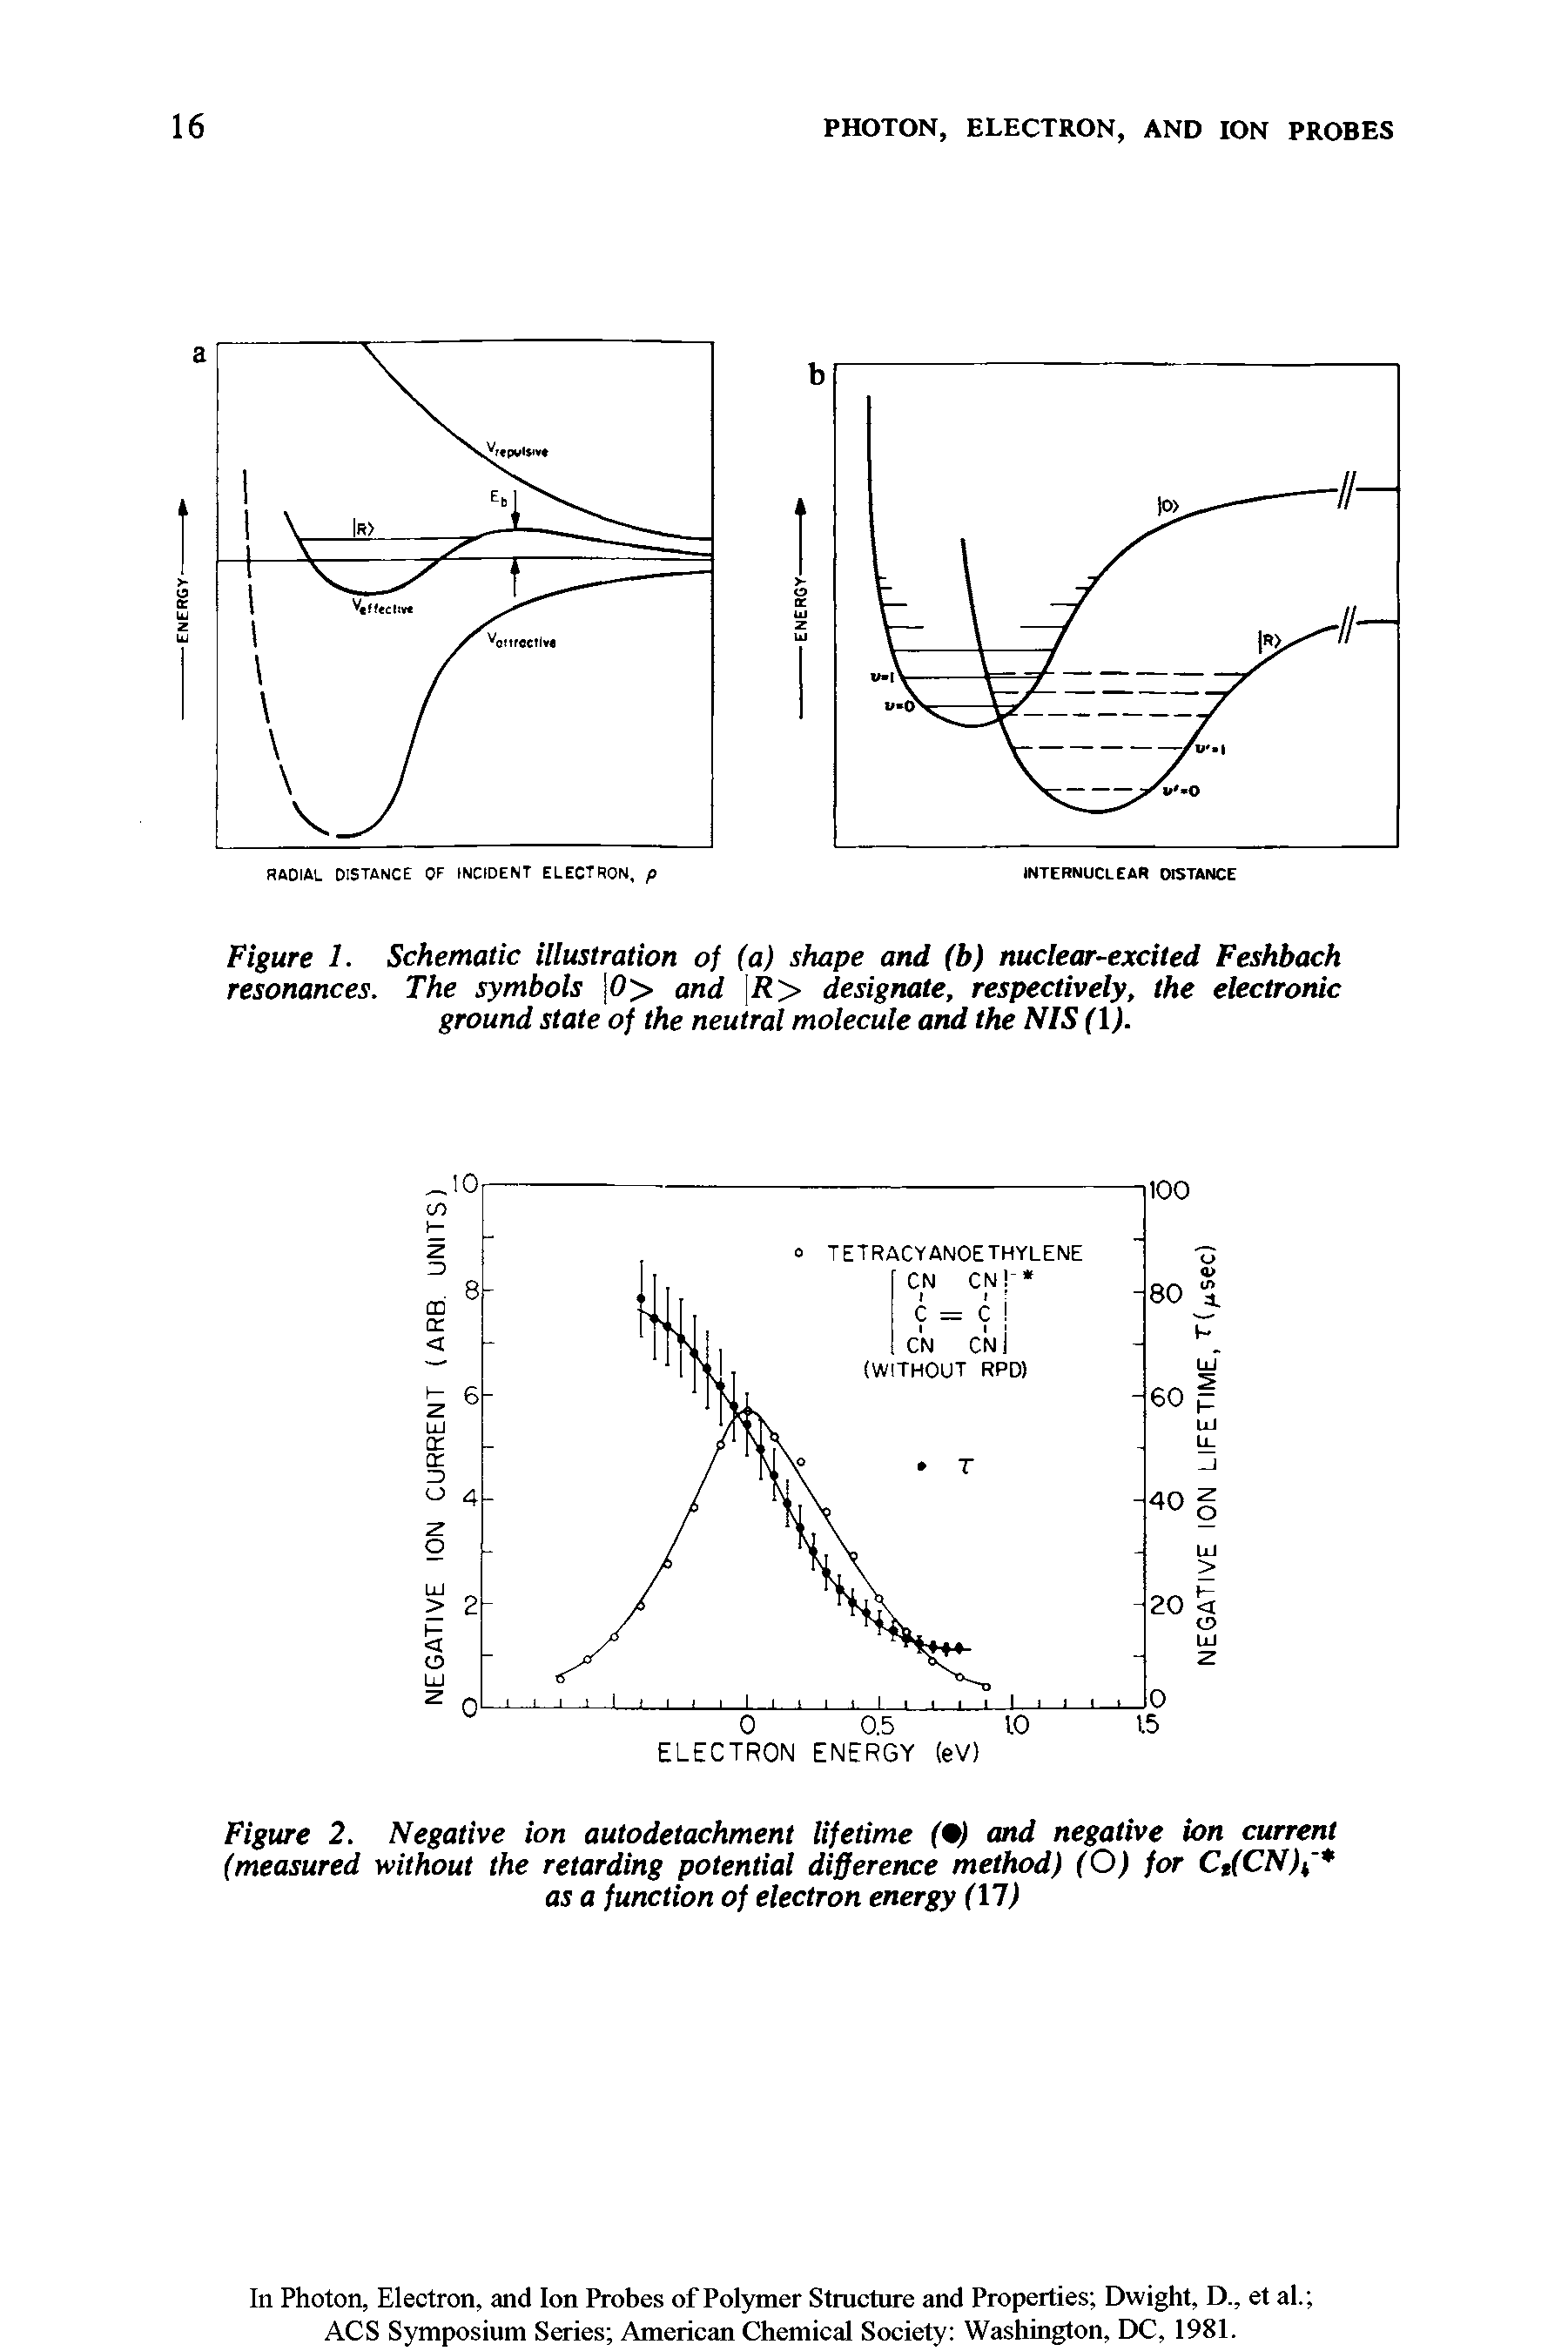 Figure 2. Negative ion autodetachment lifetime (9) and negative ion current (measured without the retarding potential difference method) (O) for Ct(CN)T as a function of electron energy (VI)...